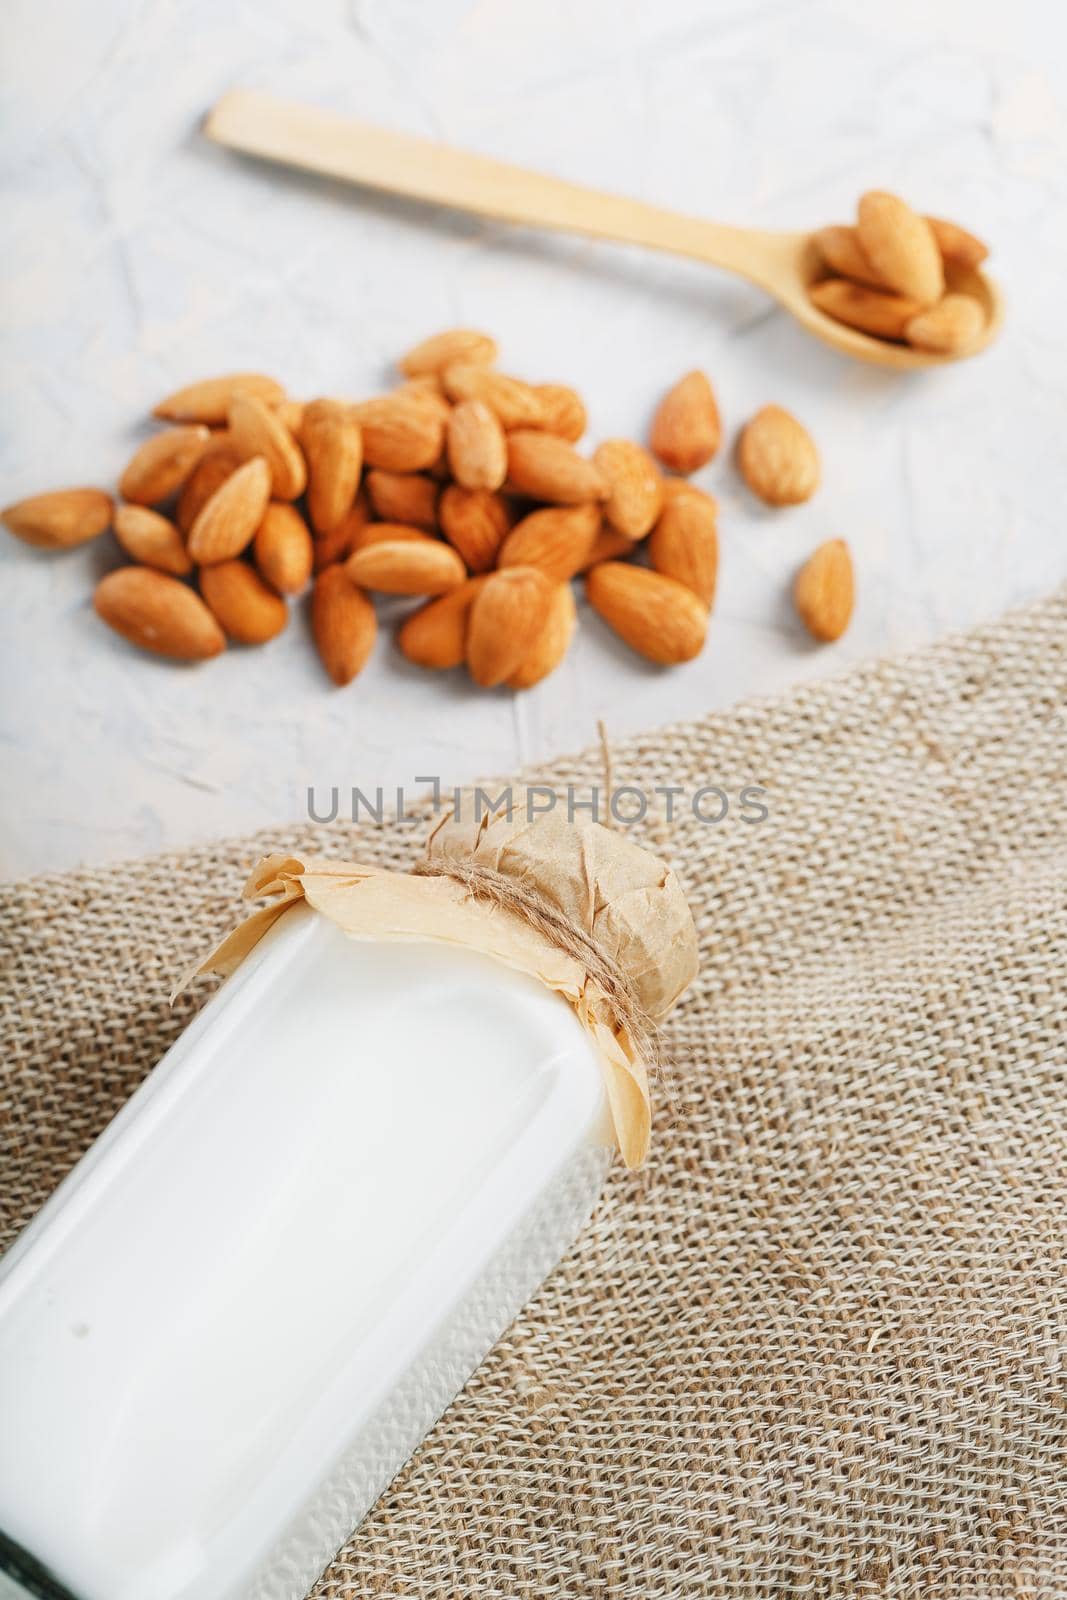 Milk from organic almonds in a transparent bottle with a scattering of seeds and a wooden spoon on a light background. Top view